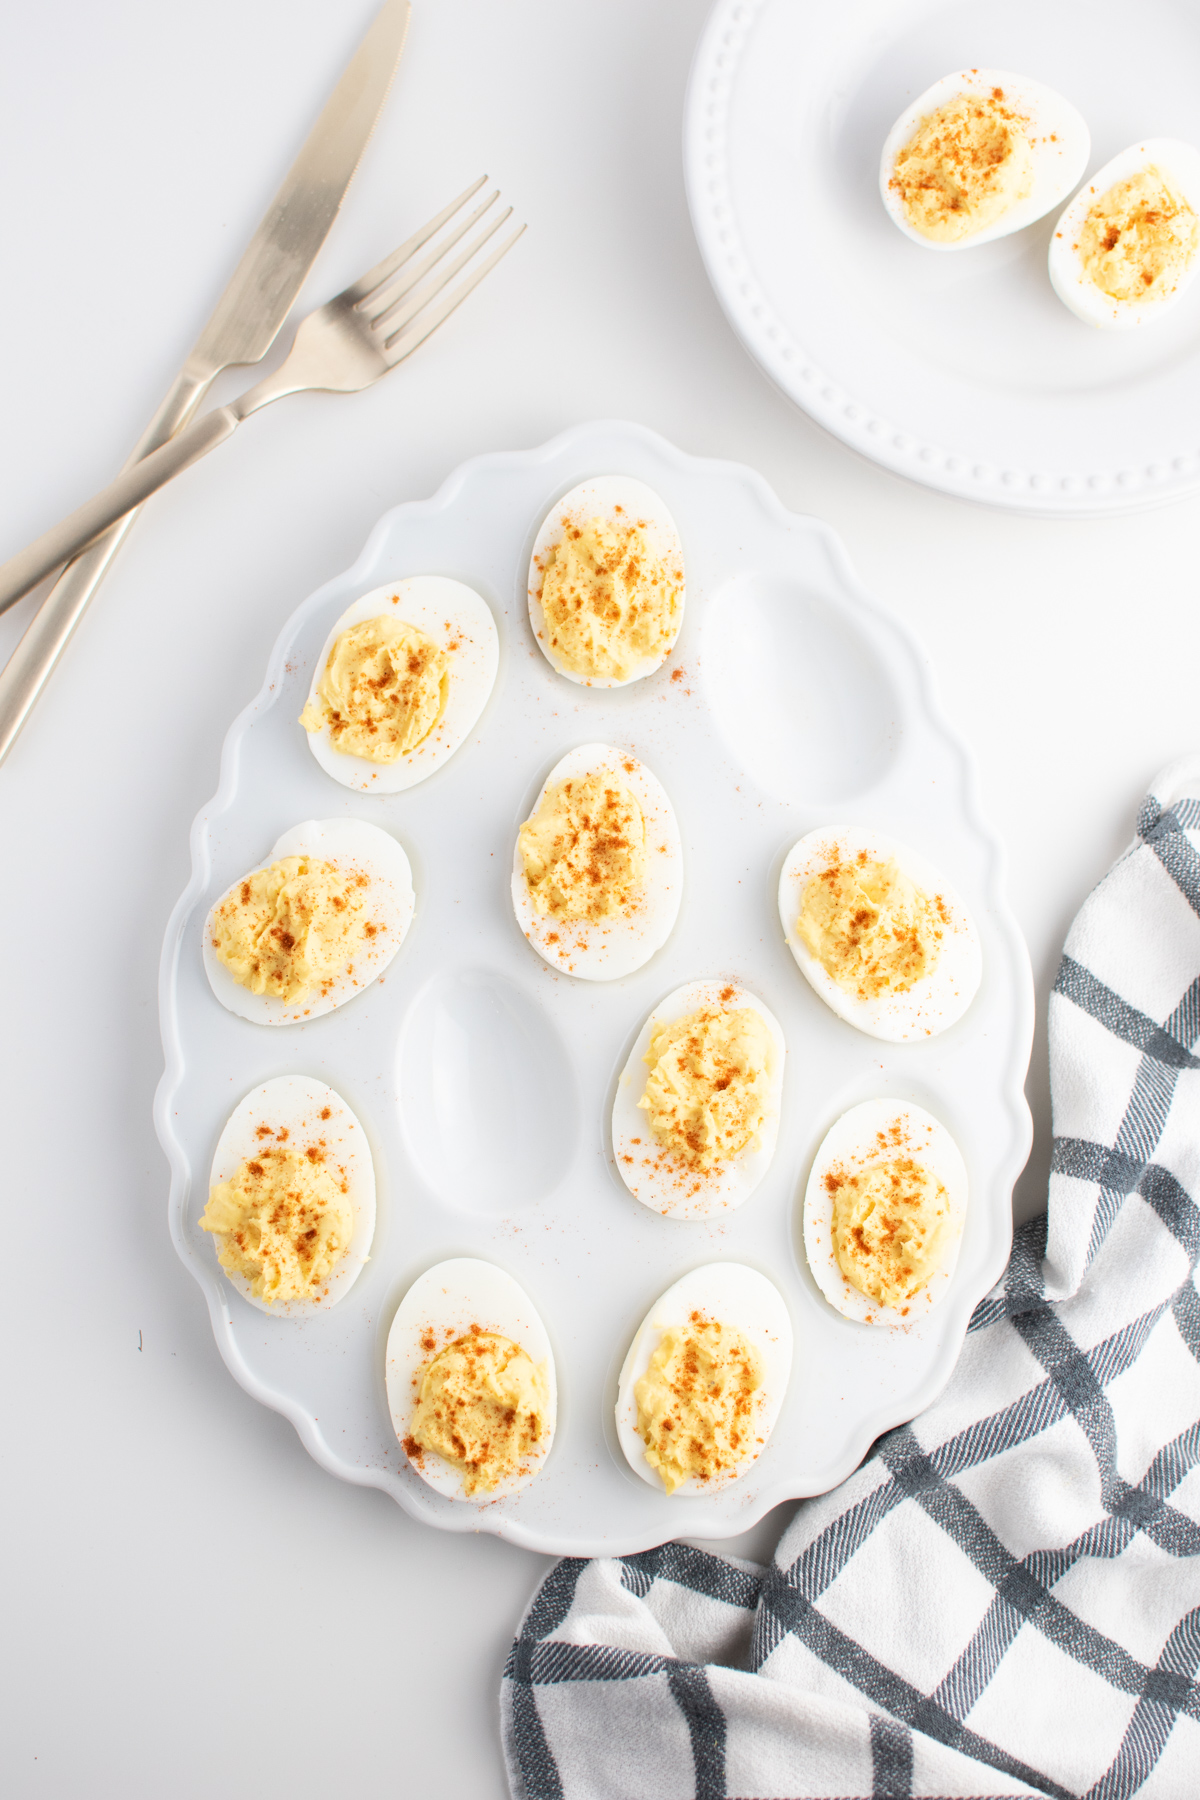 Deviled eggs on white decorative serving platter next to plate of eggs.